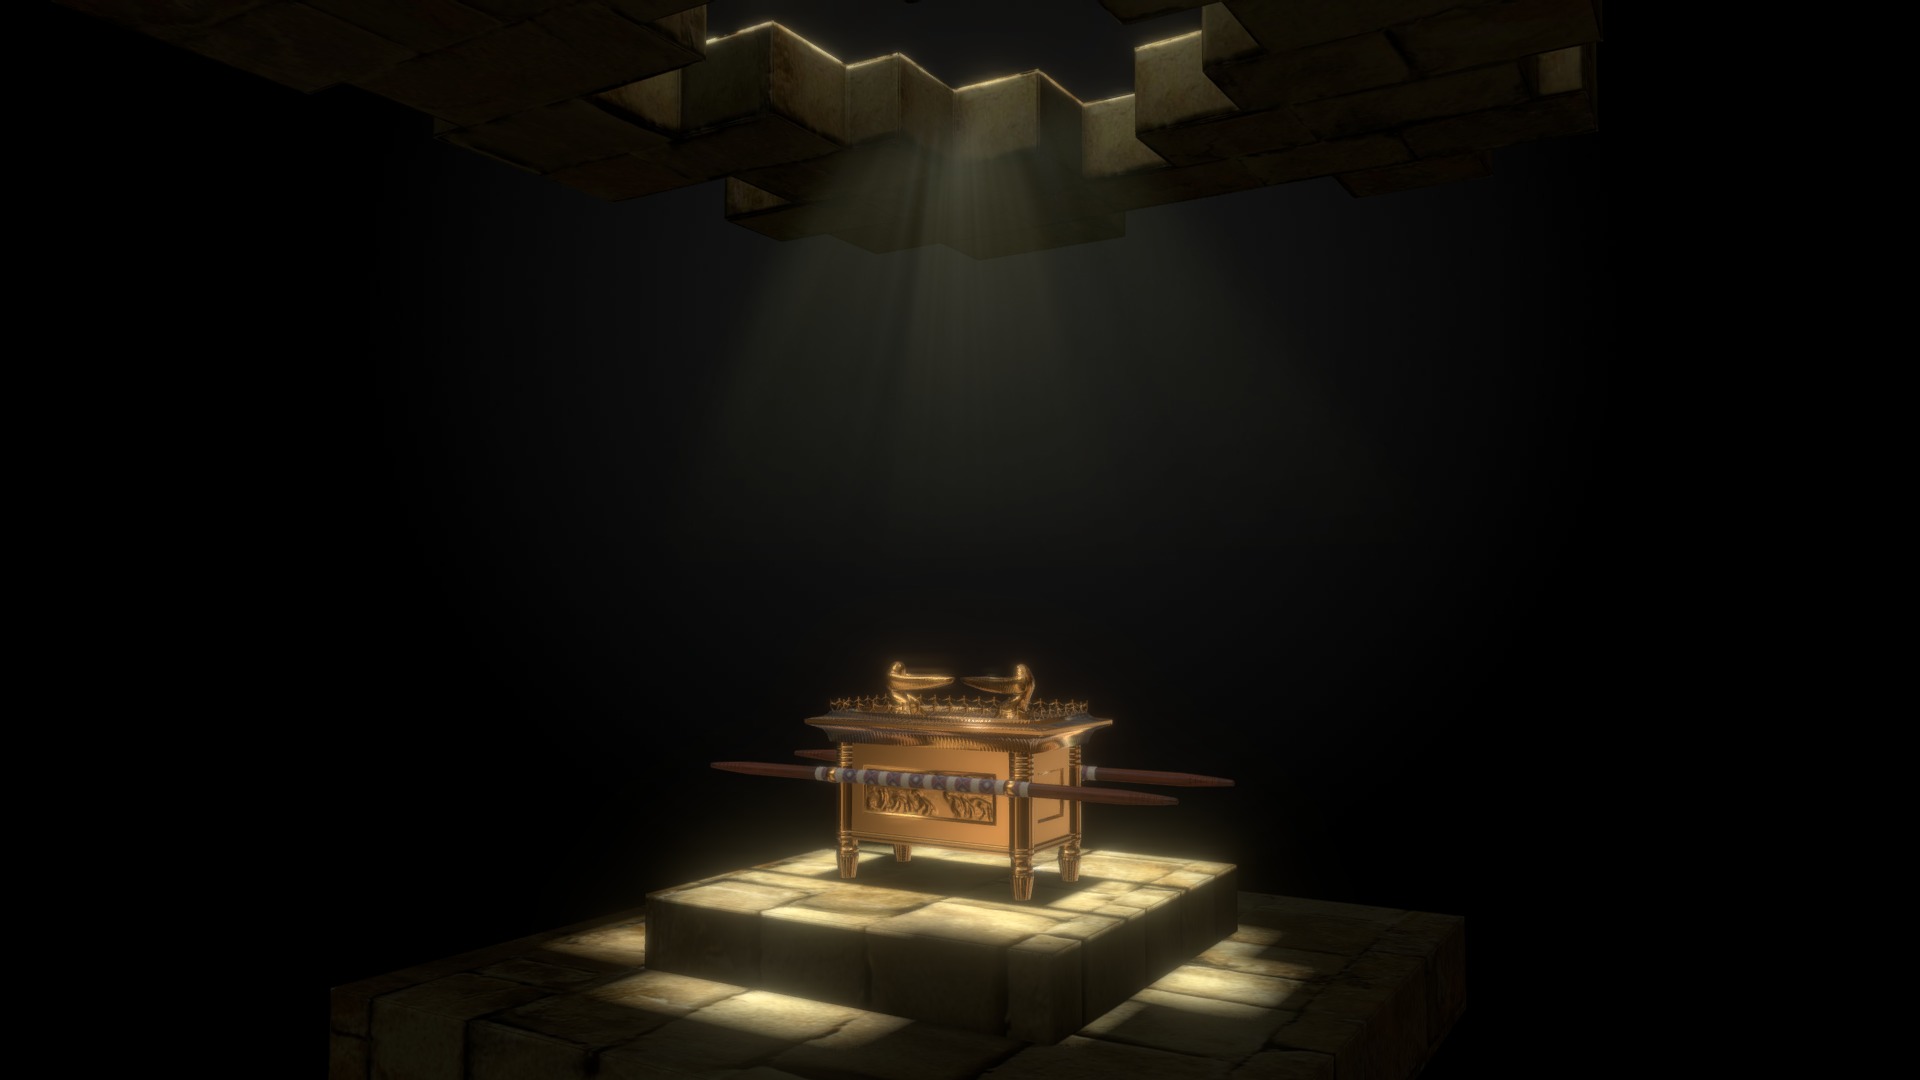 3D model Ark of the Covenant - This is a 3D model of the Ark of the Covenant. The 3D model is about a table with a light on it.